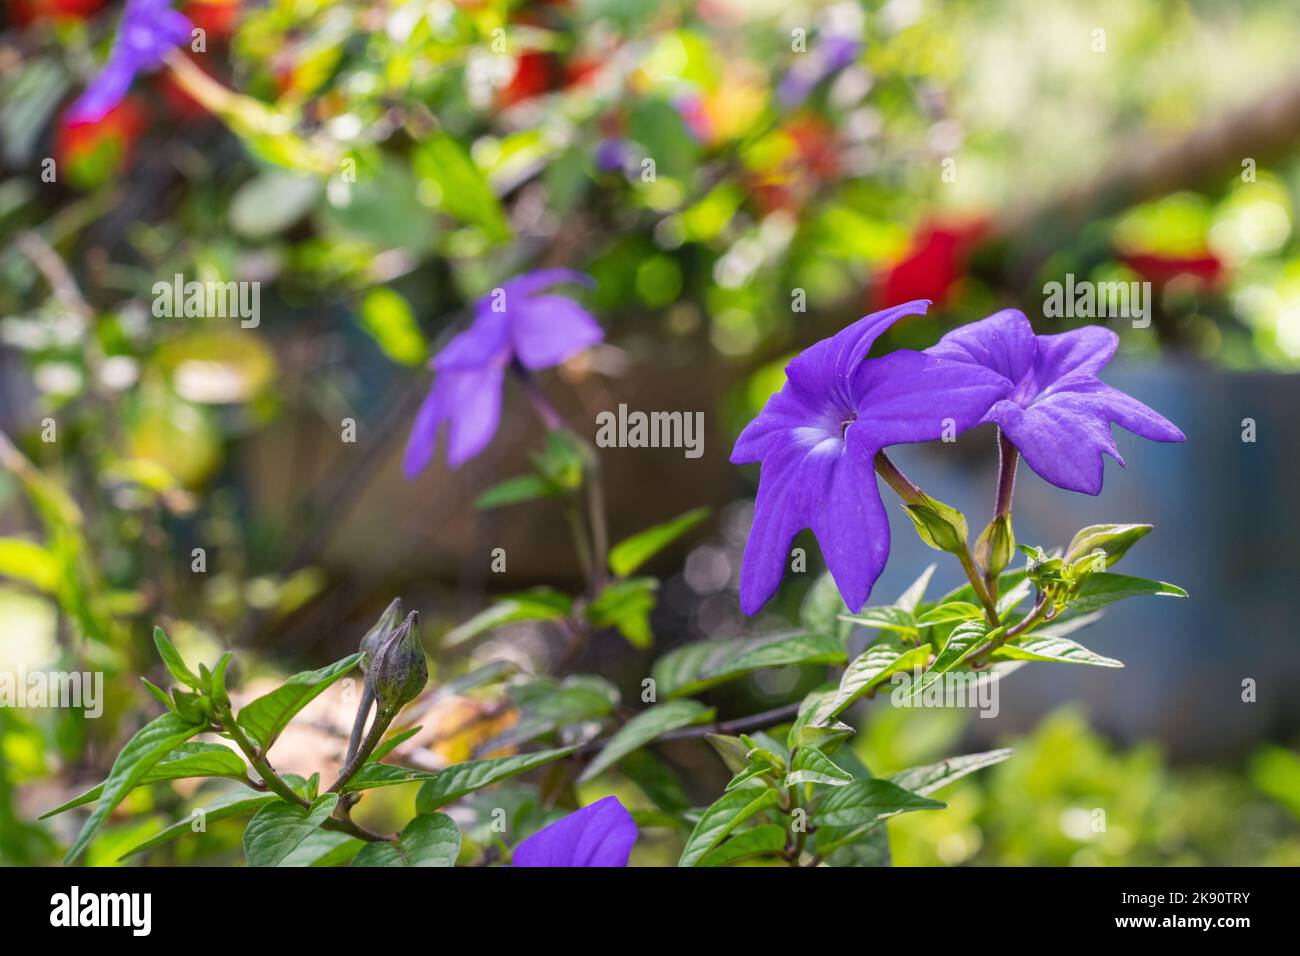 peasant garden of flowers, Browallia speciosa or purple flower with white center. in the background red flowers. phanerogamous plant belonging to the Stock Photo